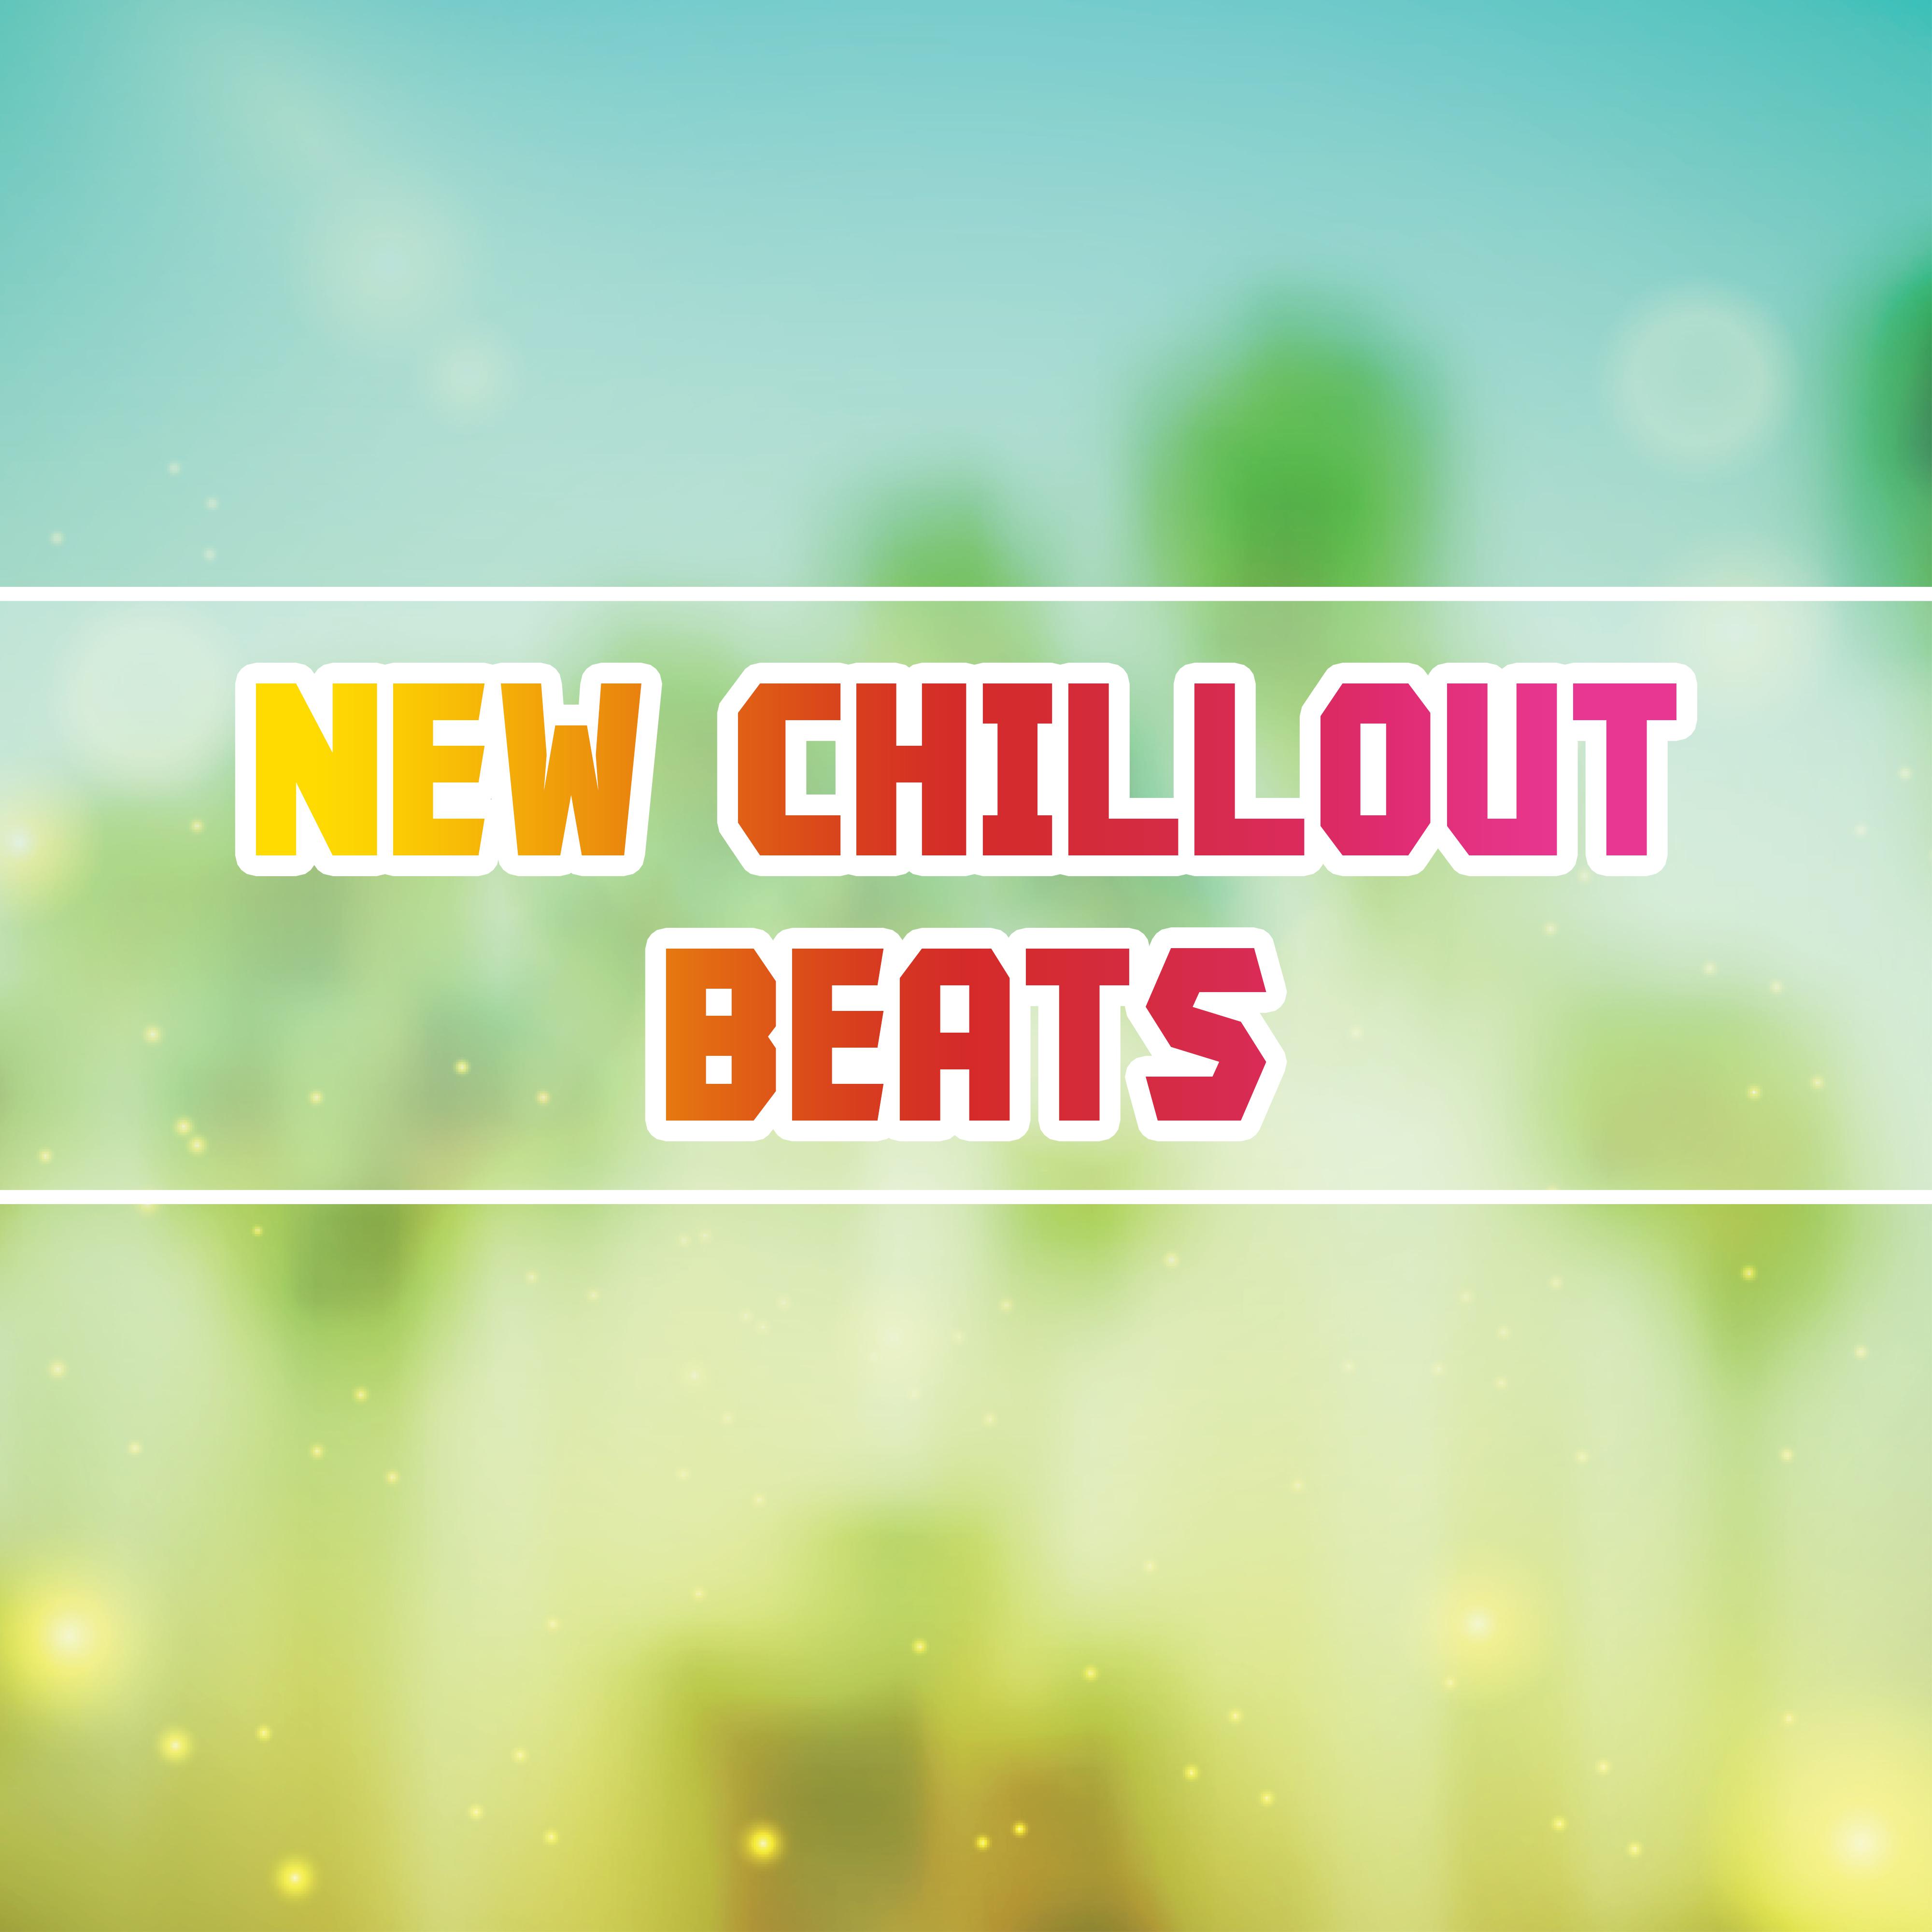 New Chillout Beats – Summer Chillout